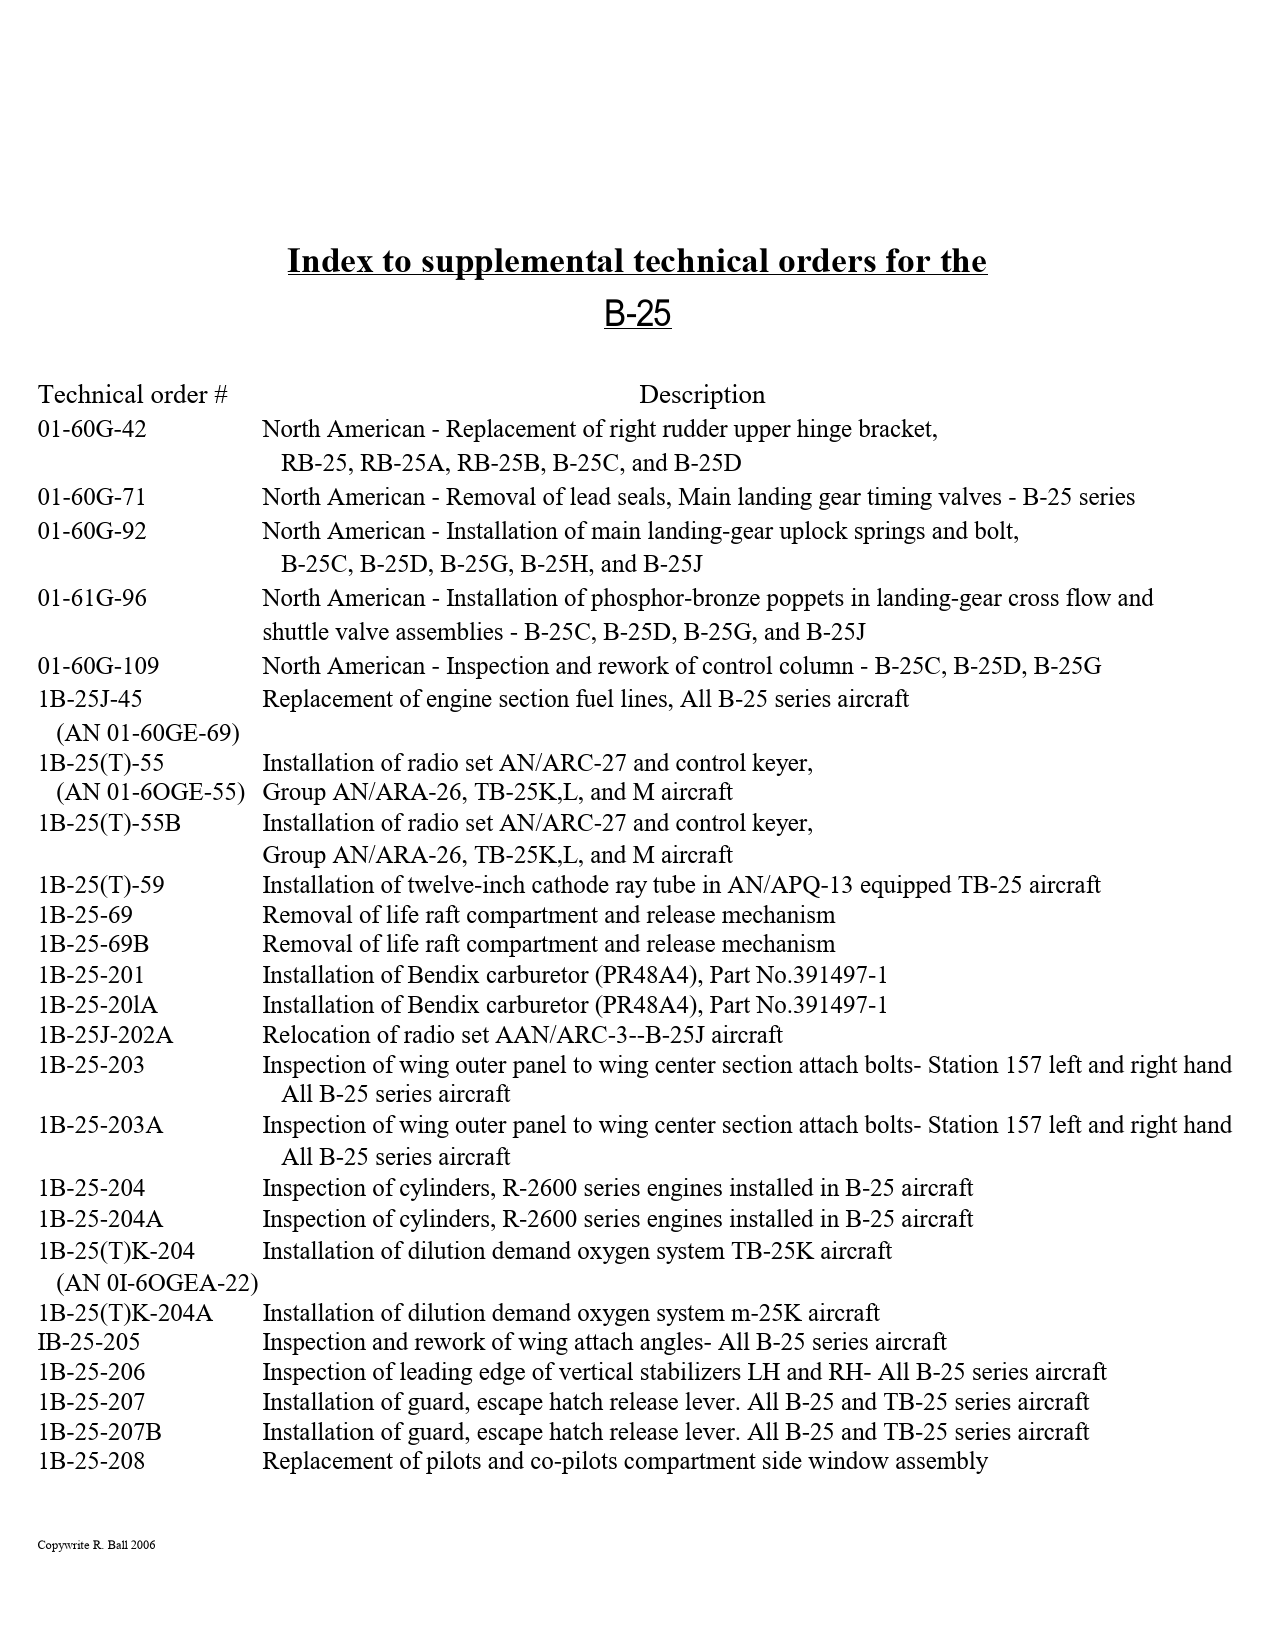 Sample page 1 from AirCorps Library document: Technical Orders - B-25 - Part 1